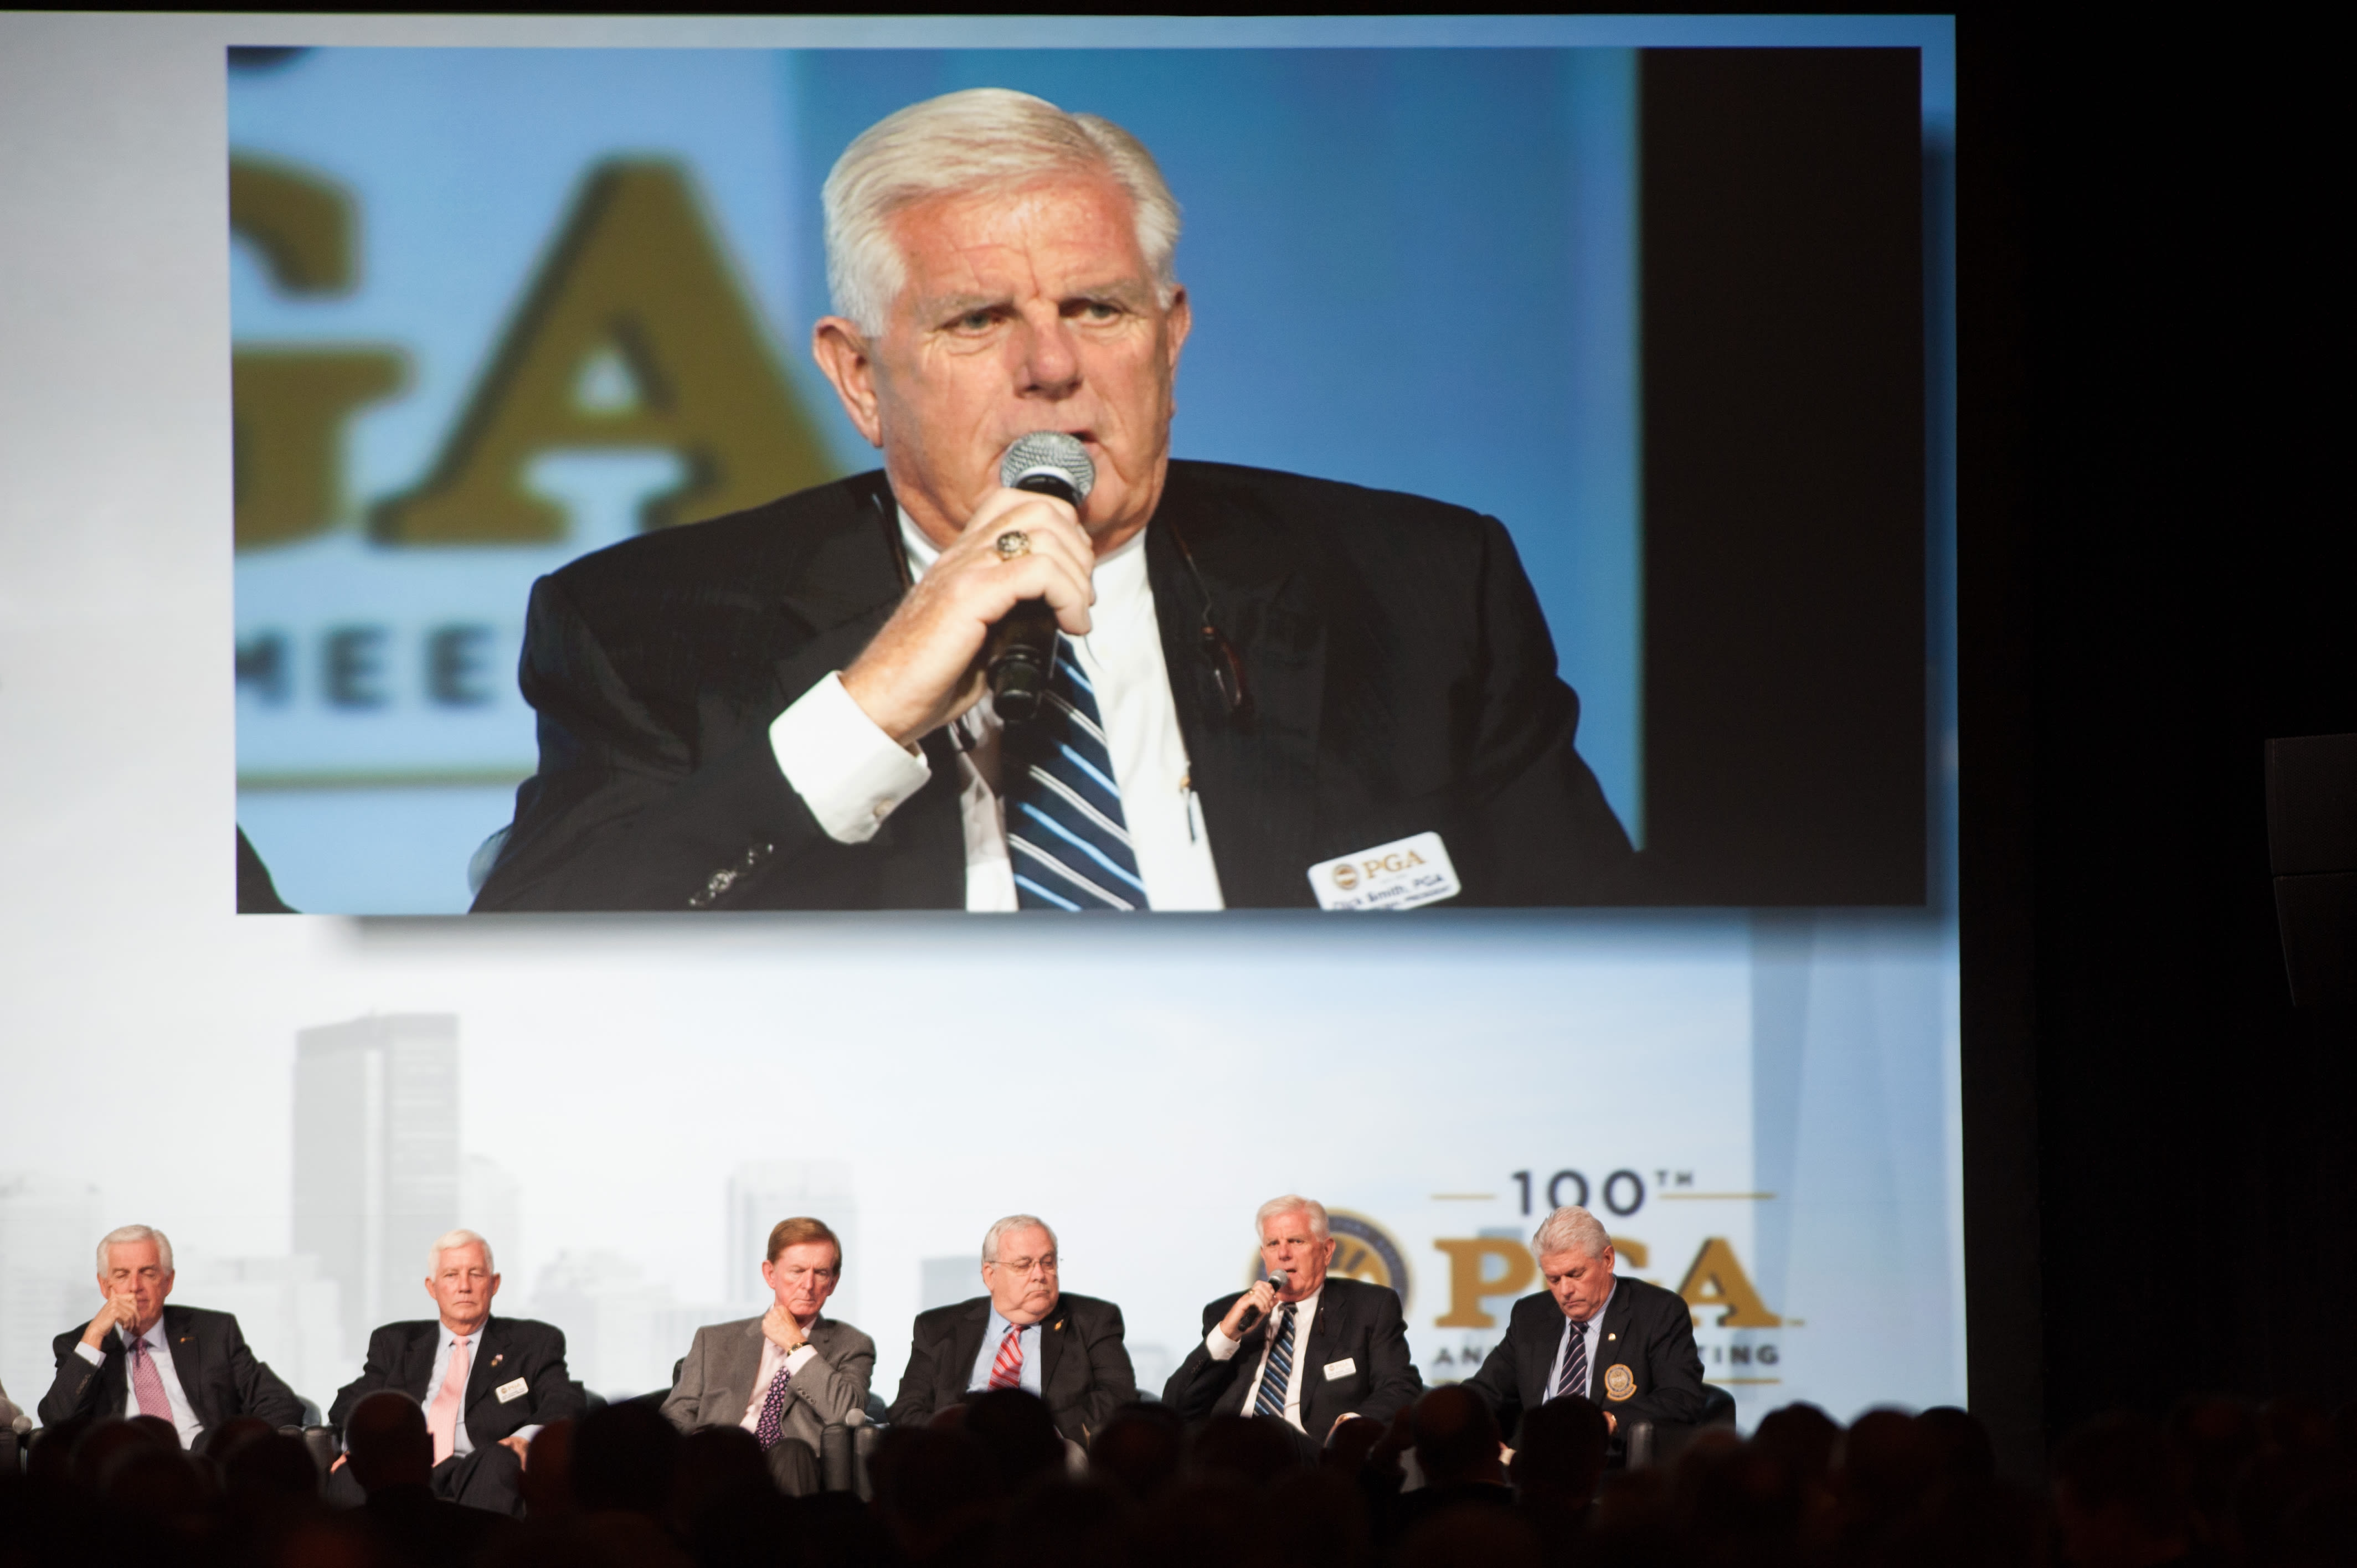 Smith alongside fellow PGA Past Presidents at the 100th PGA Annual Meeting in New York City.